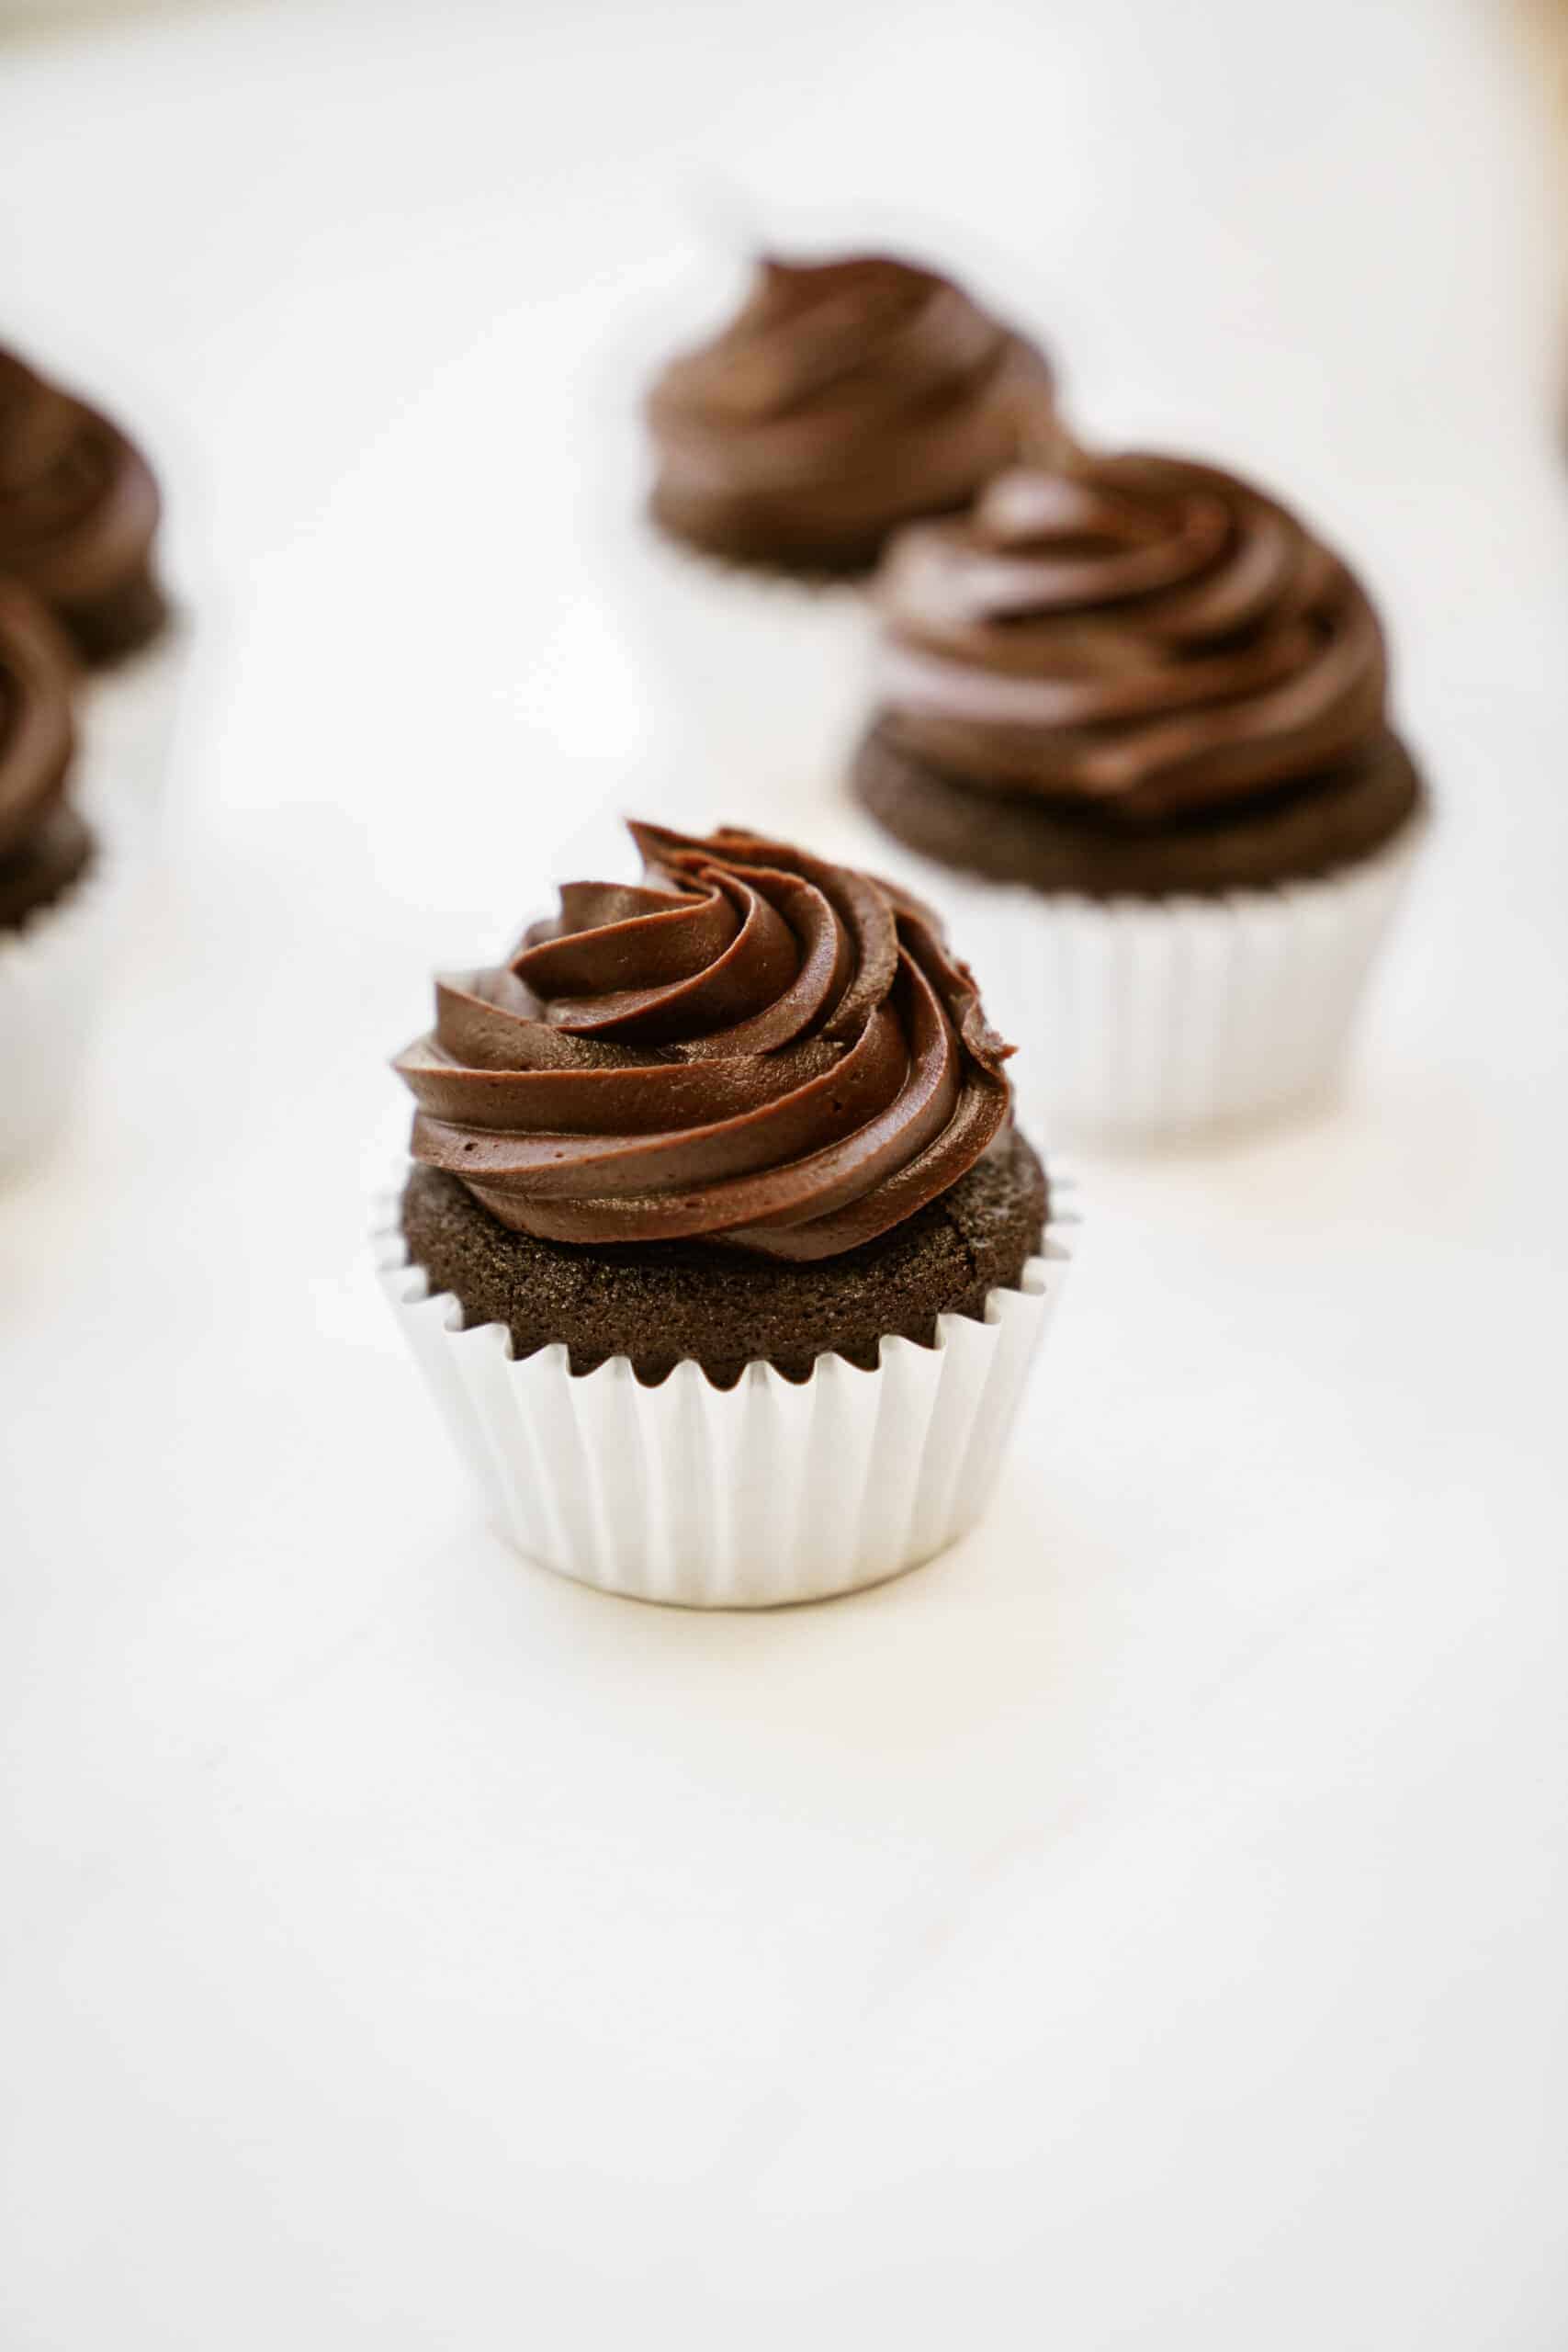 Gluten-free chocolate cupcakes on counter